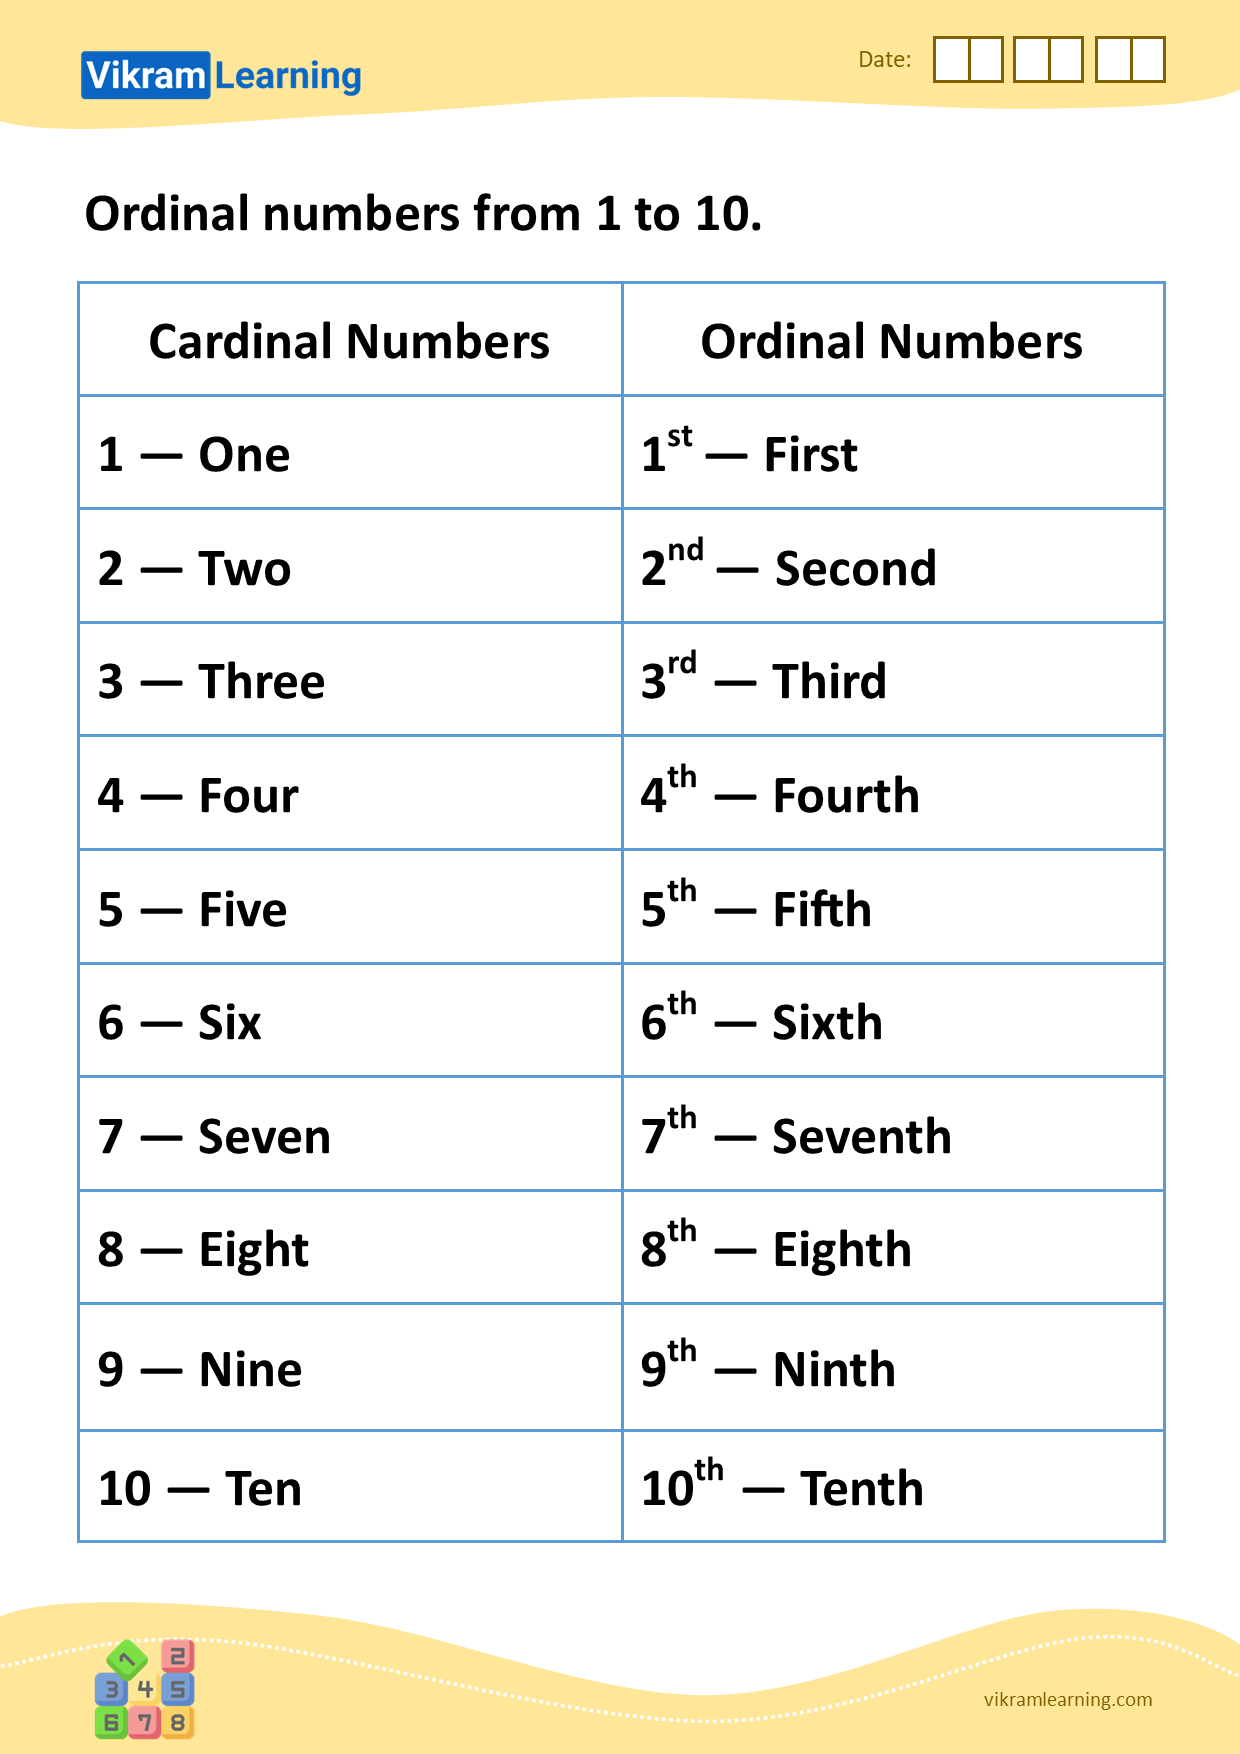 Download ordinal numbers from 1 to 10 worksheets